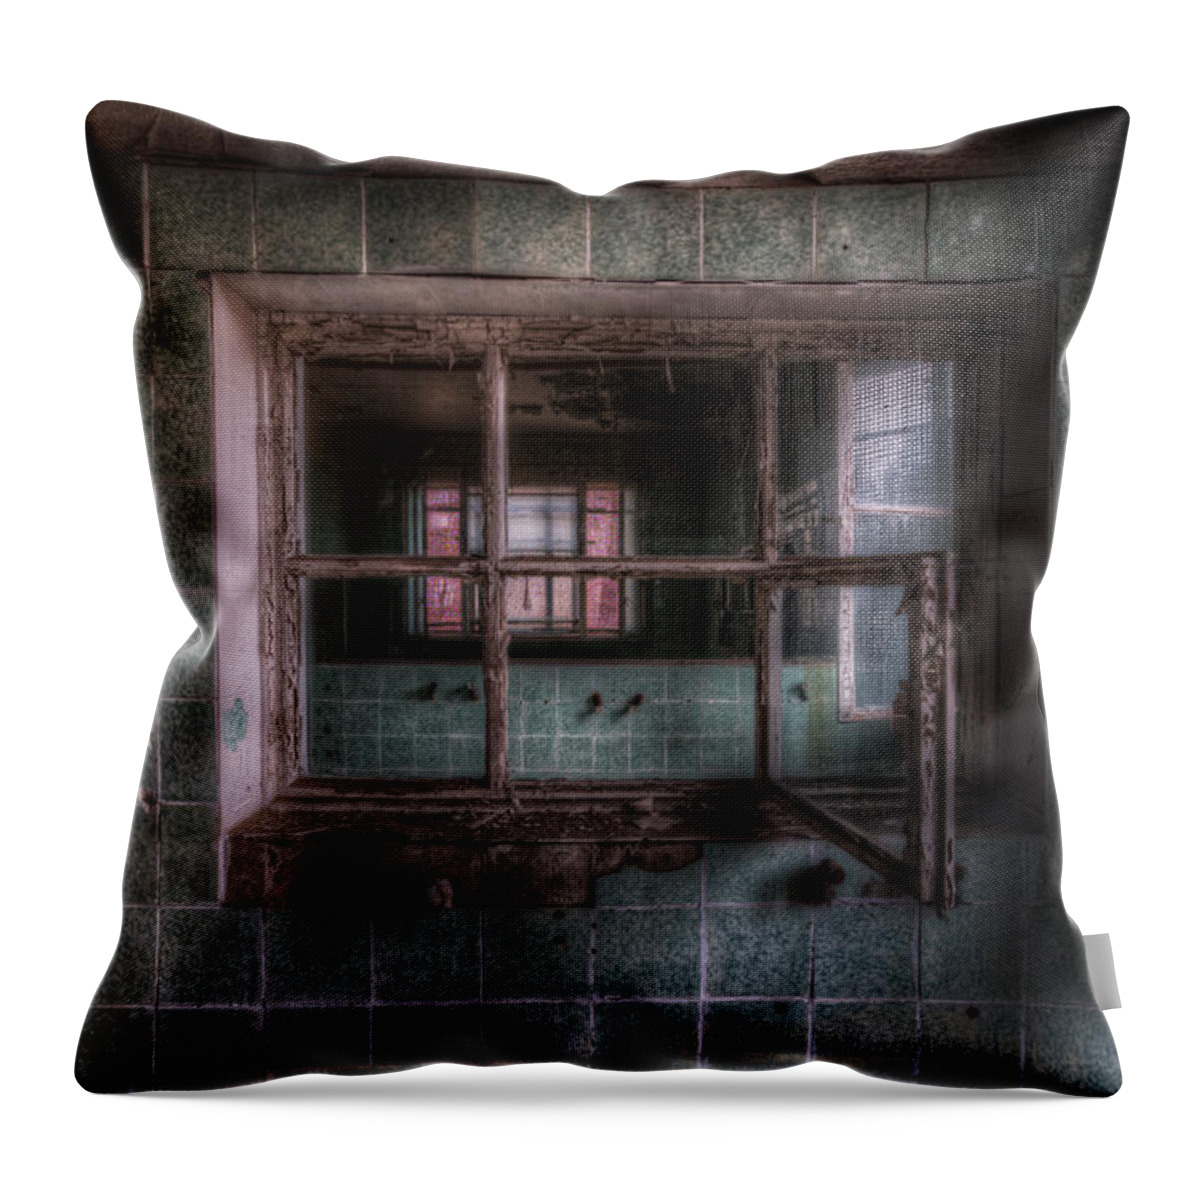 Urbex Throw Pillow featuring the digital art Operation window by Nathan Wright